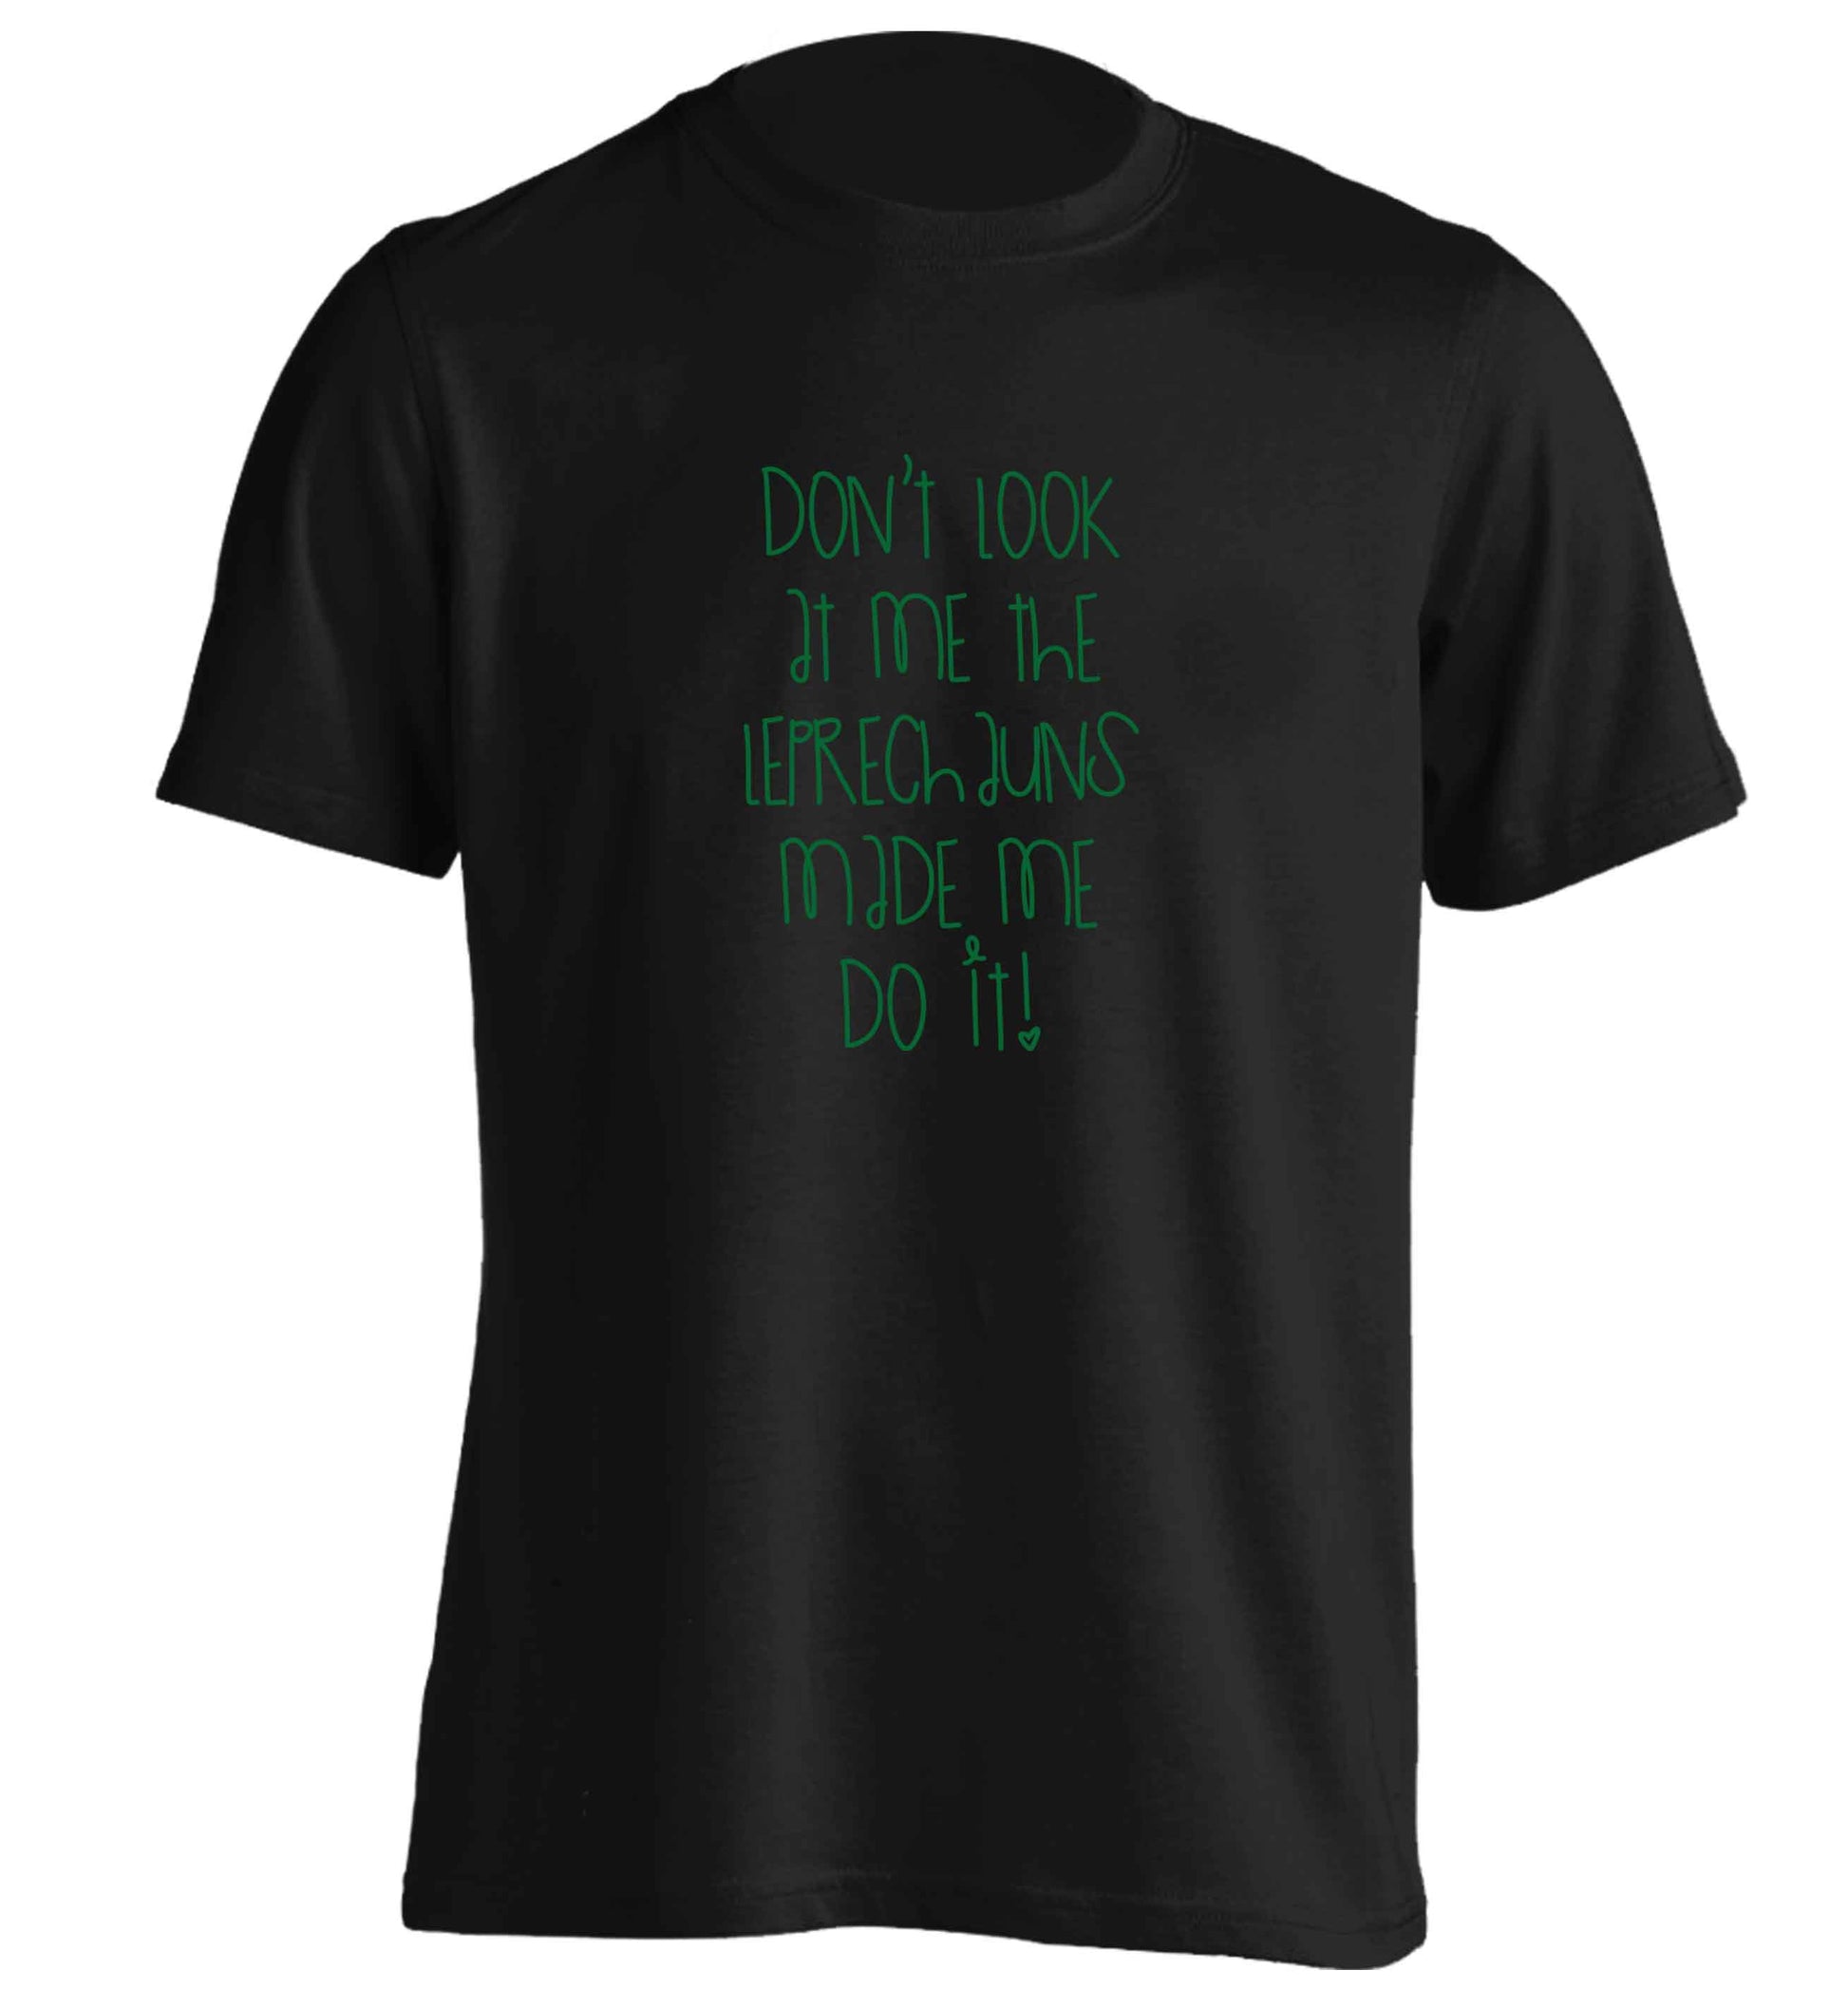 Don't look at me the leprechauns made me do it adults unisex black Tshirt 2XL